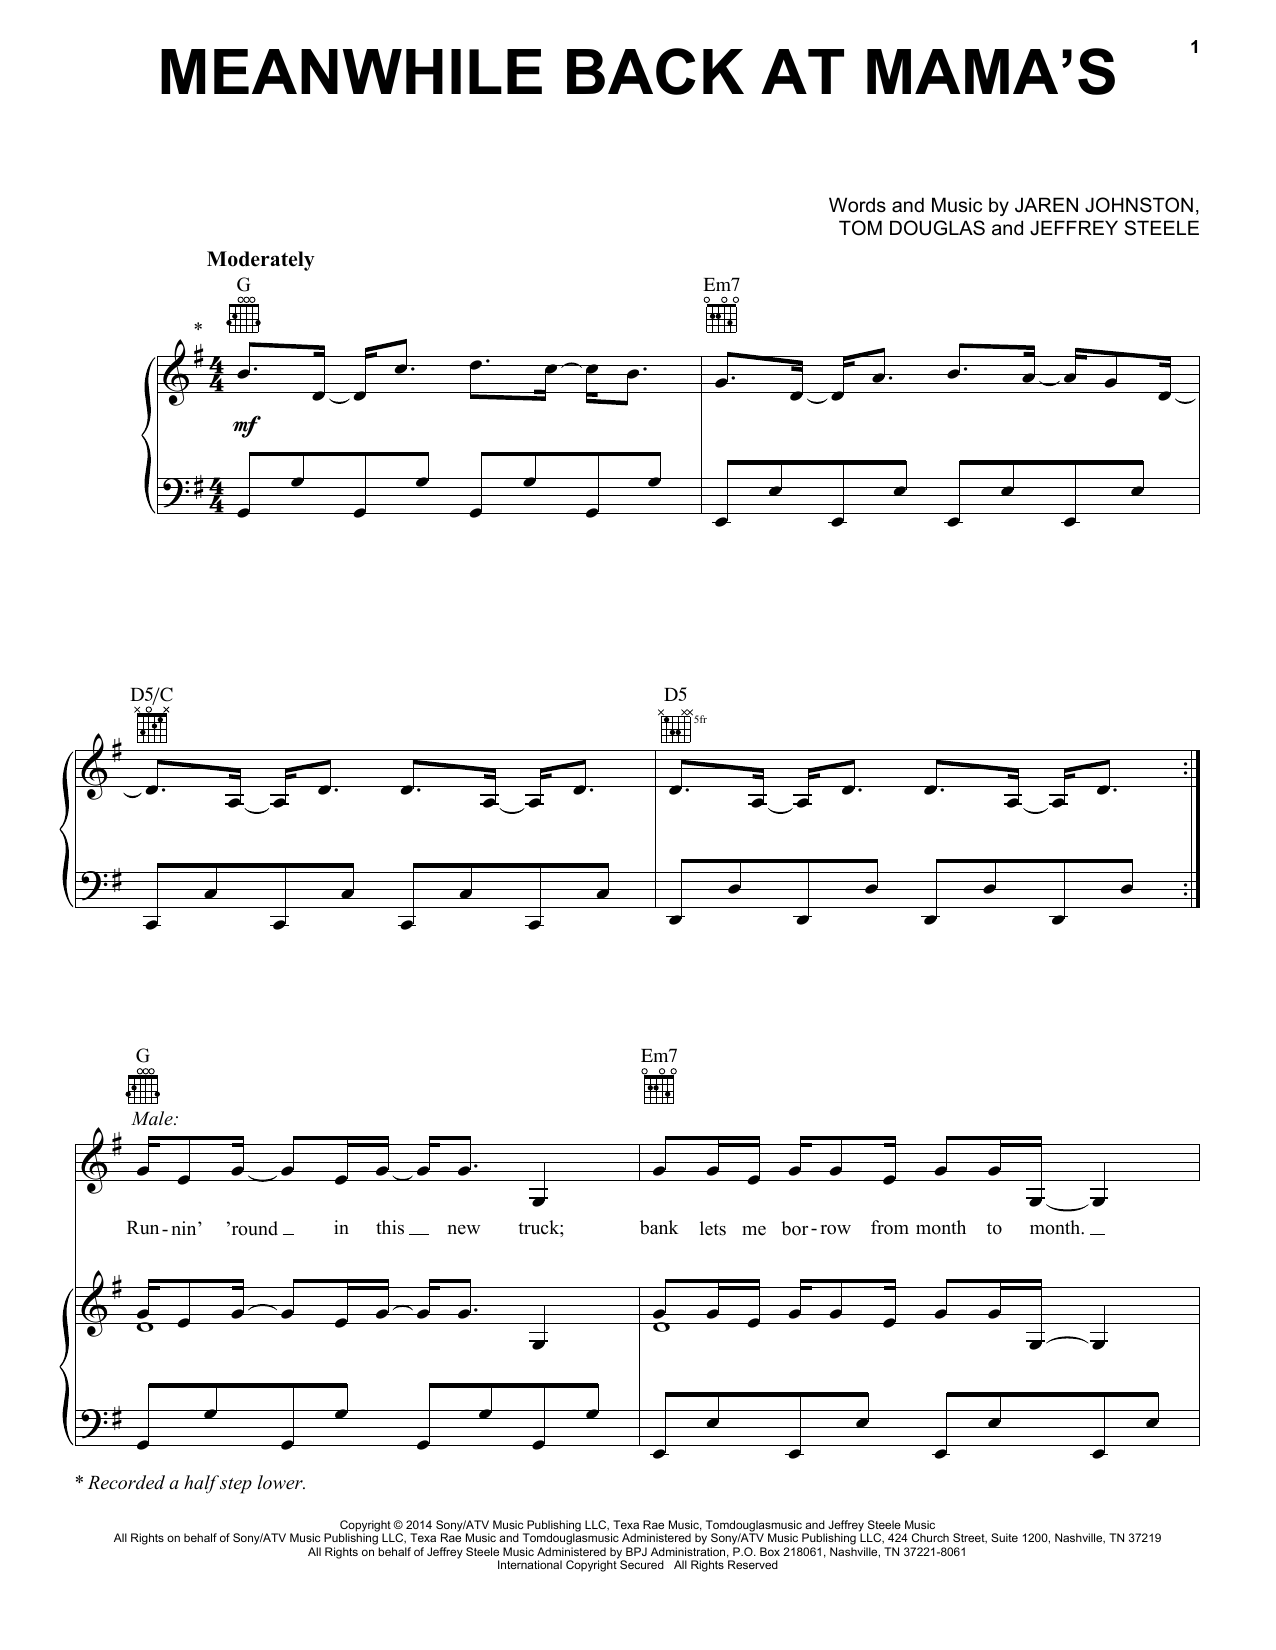 Download Tim McGraw feat. Faith Hill Meanwhile Back At Mama's Sheet Music